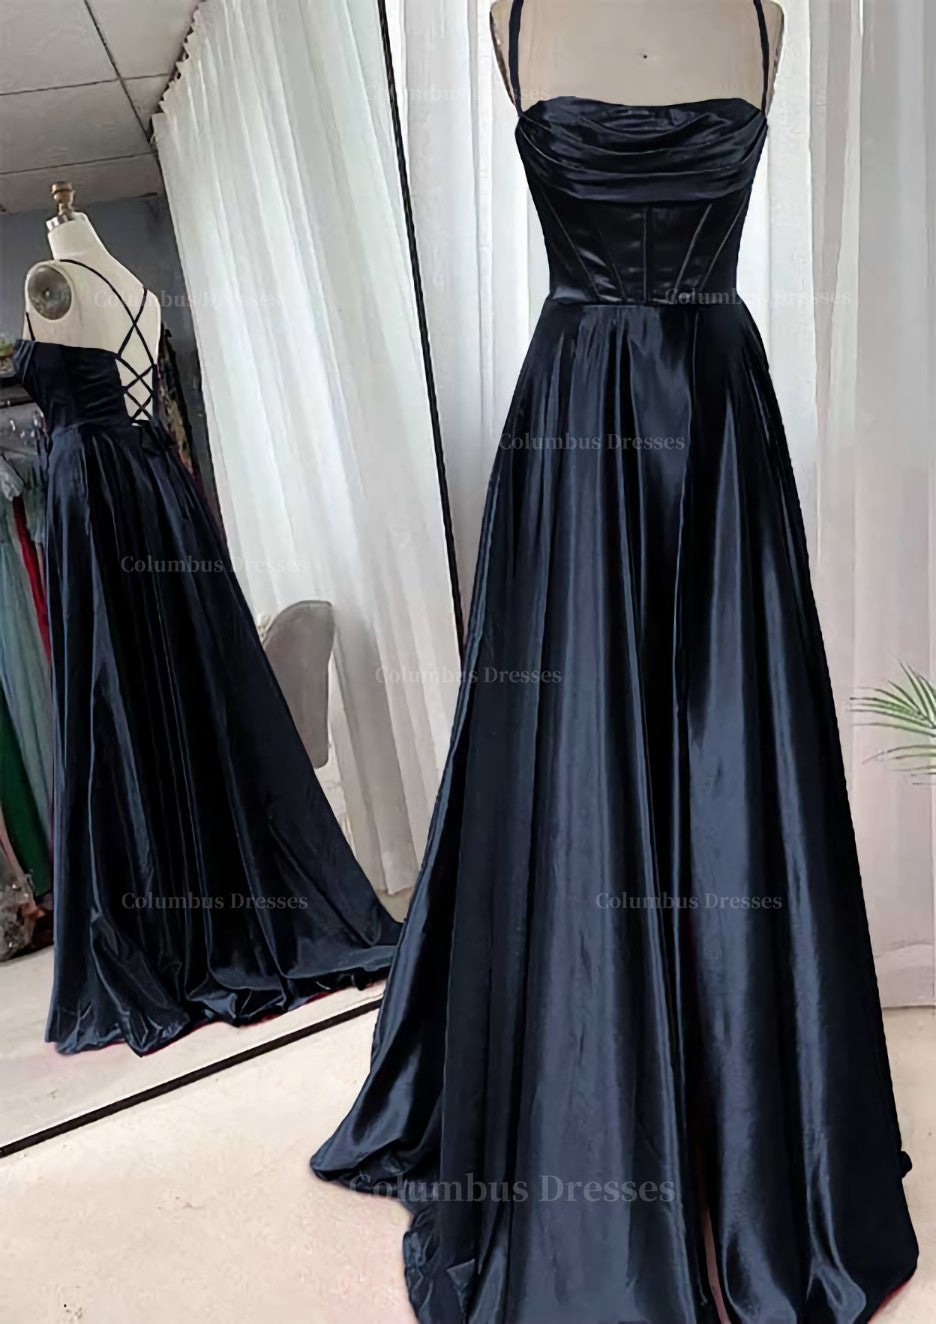 Prom Dress Princess Style, A-line Square Neckline Spaghetti Straps Sweep Train Charmeuse Prom Dress With Pleated